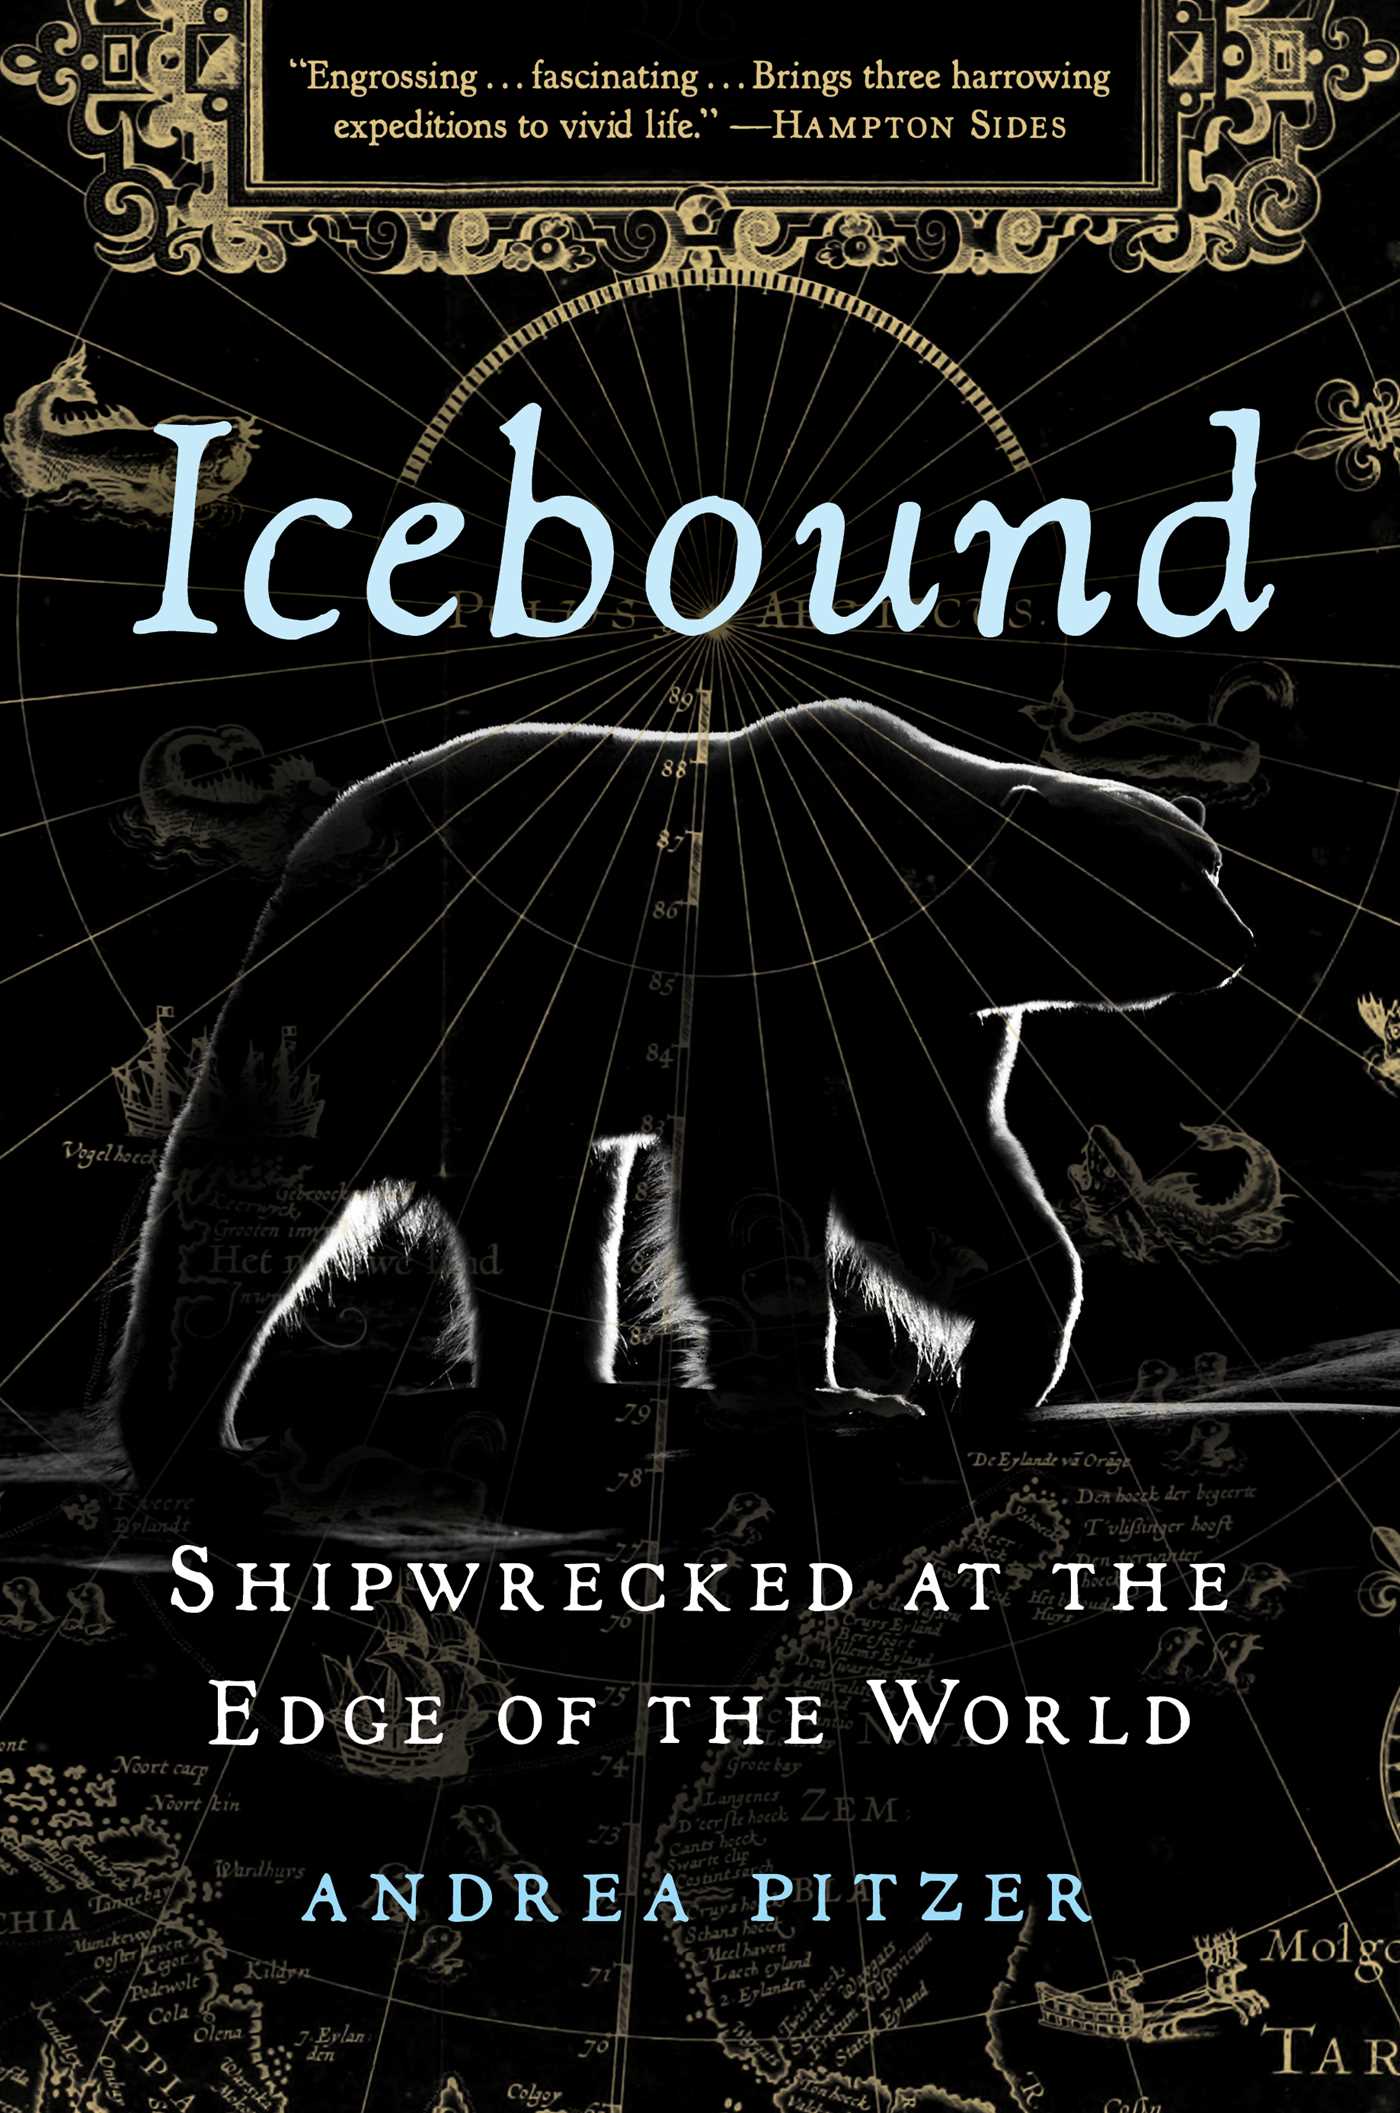 [EPUB] Icebound: Shipwrecked at the Edge of the World by Andrea Pitzer